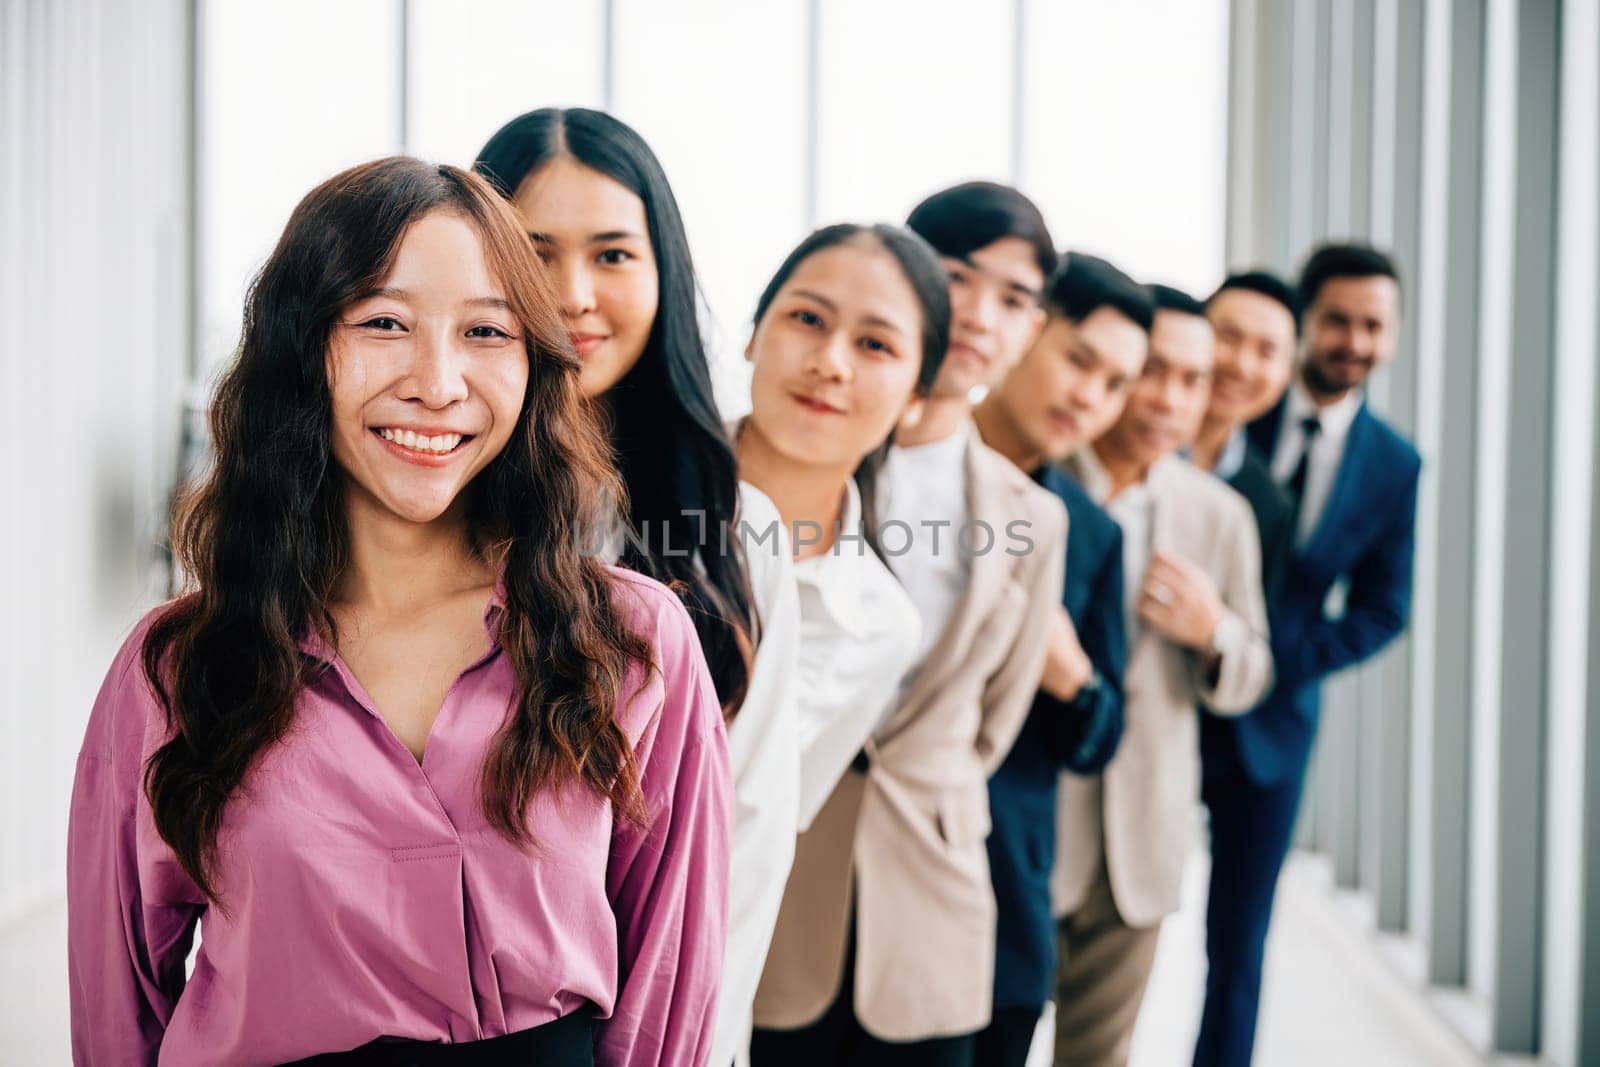 A vibrant group portrait of young business professionals in the office, crossing their arms with pride. This diverse and confident team embodies the values of teamwork and success. by Sorapop